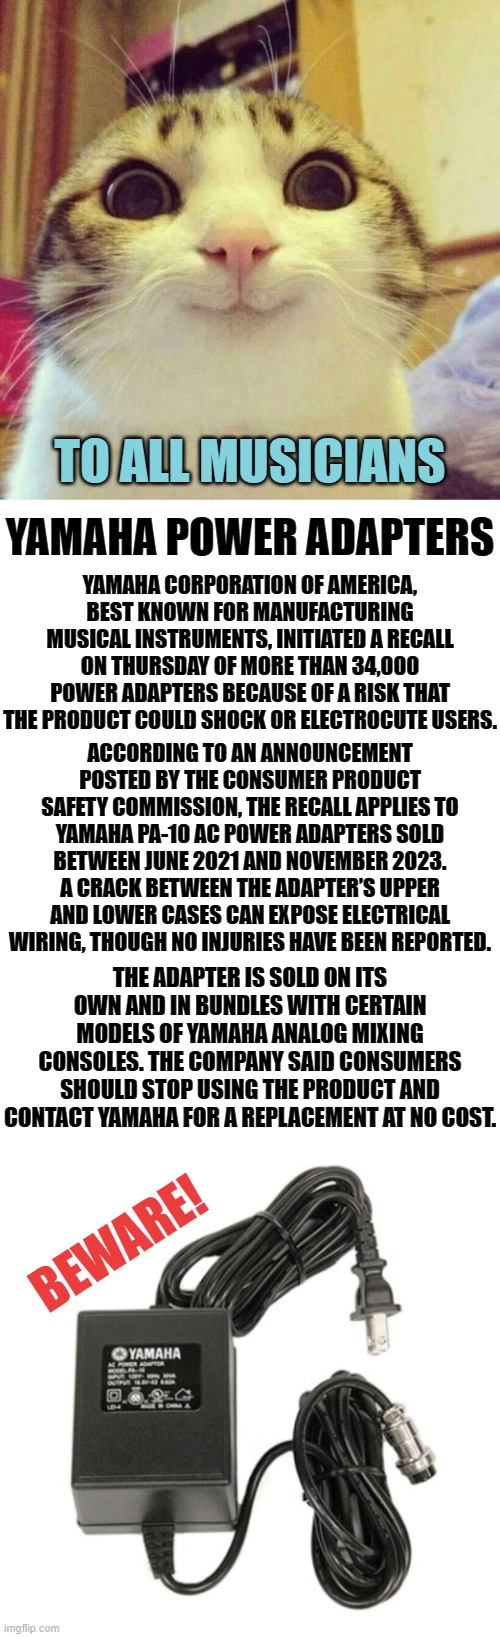 A Warning | TO ALL MUSICIANS; YAMAHA POWER ADAPTERS; YAMAHA CORPORATION OF AMERICA, BEST KNOWN FOR MANUFACTURING MUSICAL INSTRUMENTS, INITIATED A RECALL ON THURSDAY OF MORE THAN 34,000 POWER ADAPTERS BECAUSE OF A RISK THAT THE PRODUCT COULD SHOCK OR ELECTROCUTE USERS. ACCORDING TO AN ANNOUNCEMENT POSTED BY THE CONSUMER PRODUCT SAFETY COMMISSION, THE RECALL APPLIES TO YAMAHA PA-10 AC POWER ADAPTERS SOLD BETWEEN JUNE 2021 AND NOVEMBER 2023. A CRACK BETWEEN THE ADAPTER’S UPPER AND LOWER CASES CAN EXPOSE ELECTRICAL WIRING, THOUGH NO INJURIES HAVE BEEN REPORTED. THE ADAPTER IS SOLD ON ITS OWN AND IN BUNDLES WITH CERTAIN MODELS OF YAMAHA ANALOG MIXING CONSOLES. THE COMPANY SAID CONSUMERS SHOULD STOP USING THE PRODUCT AND CONTACT YAMAHA FOR A REPLACEMENT AT NO COST. BEWARE! | image tagged in memes,smiling cat,fun,musicians,recall,warning | made w/ Imgflip meme maker